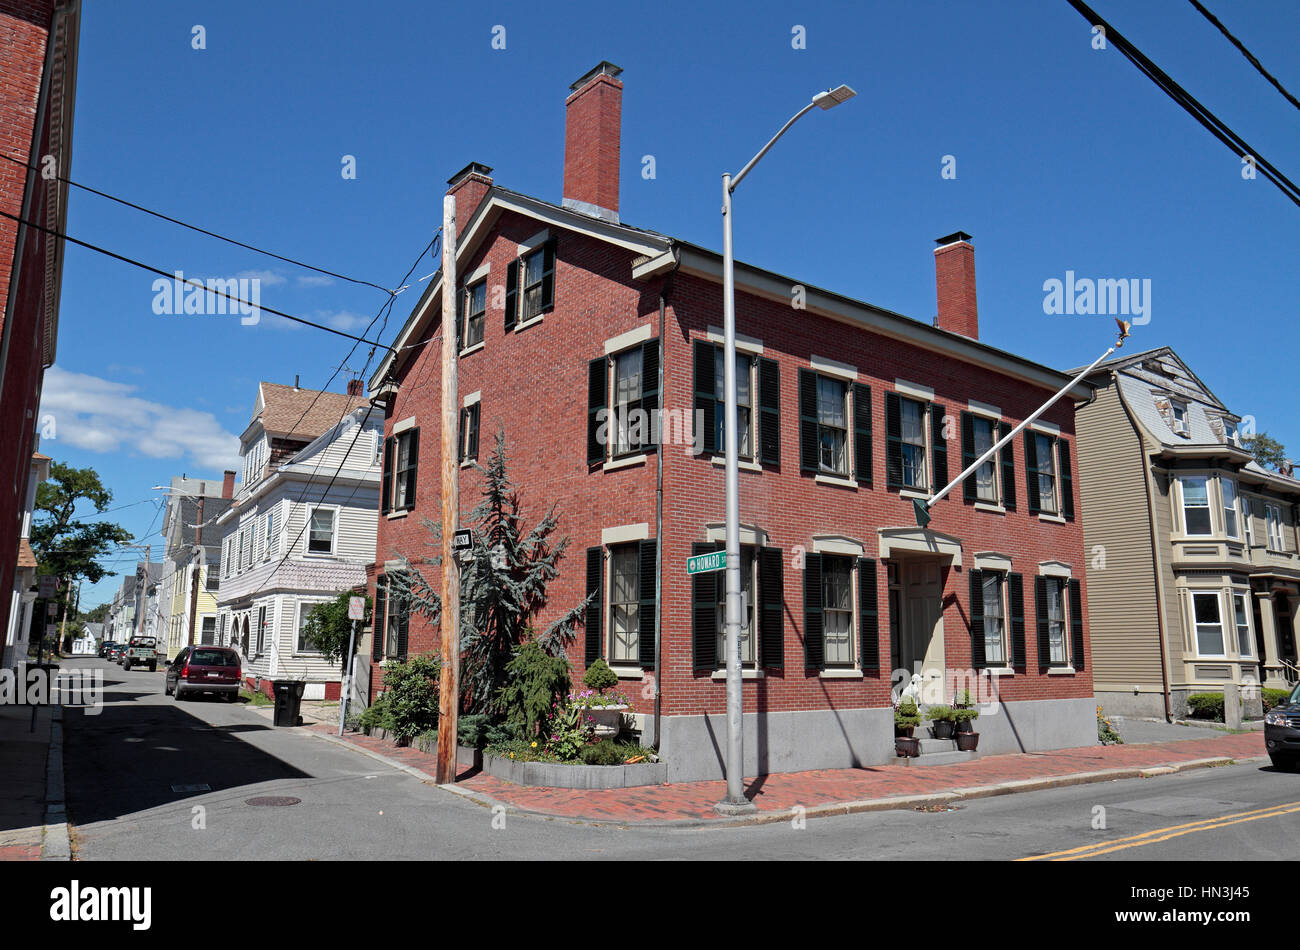 Typical residential properties in Salem, Essex County, Massachusetts, United States. Stock Photo